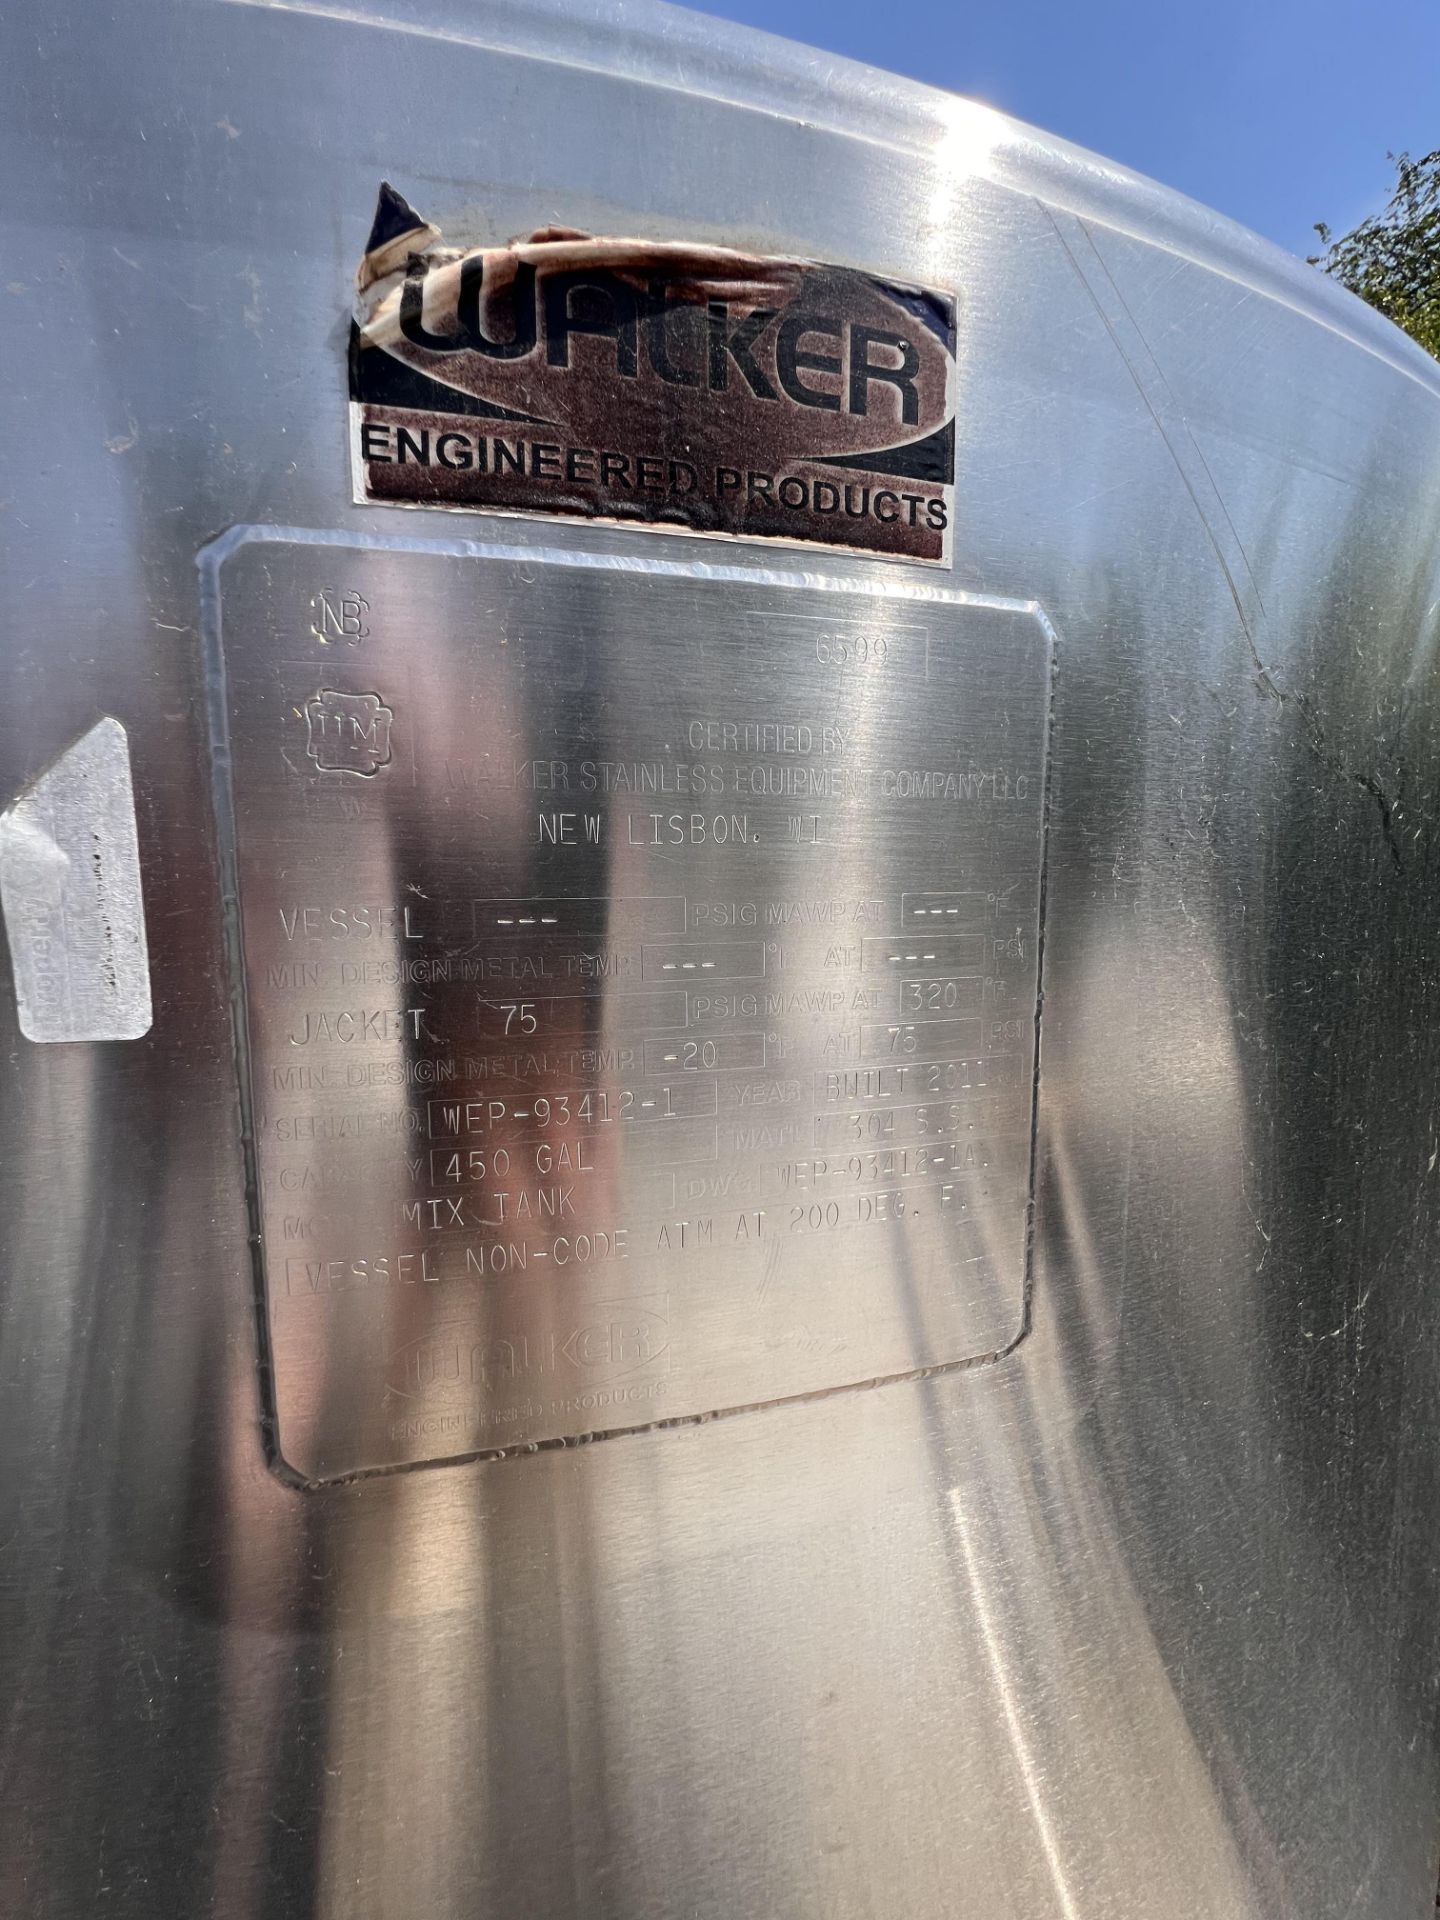 WALKER 450 GALLON JACKETED MIXING TANK, MODEL MIX TANK, S/N WEP-93412-1 - Image 10 of 21